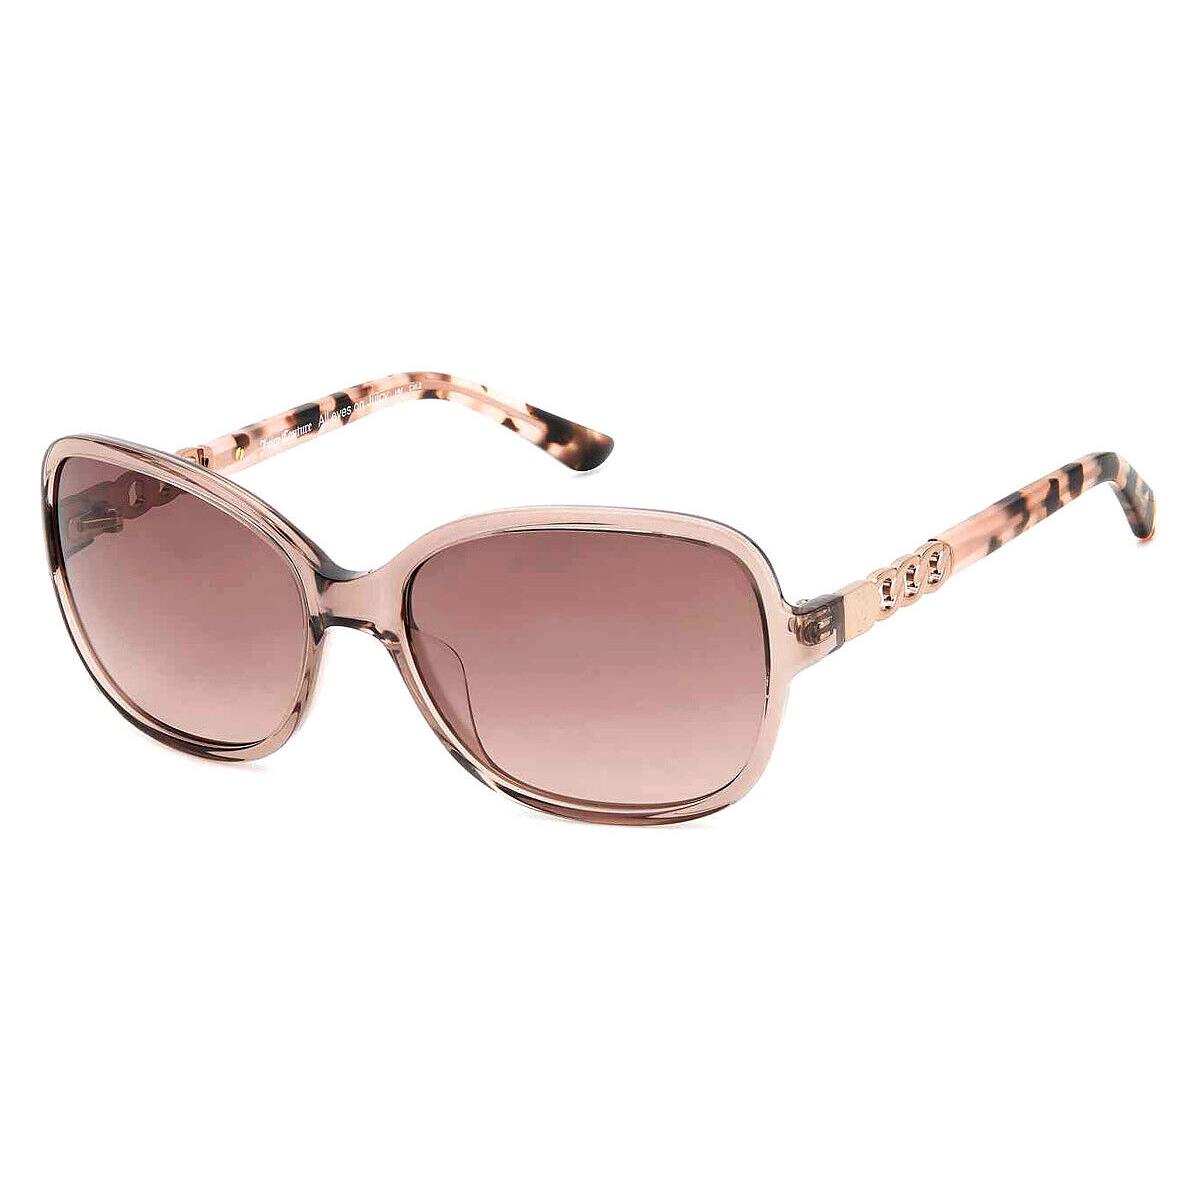 Juicy Couture Juc Sunglasses Crystal Mauve / Brown Gradient - Frame: Crystal Mauve / Brown Gradient, Lens: Brown Gradient